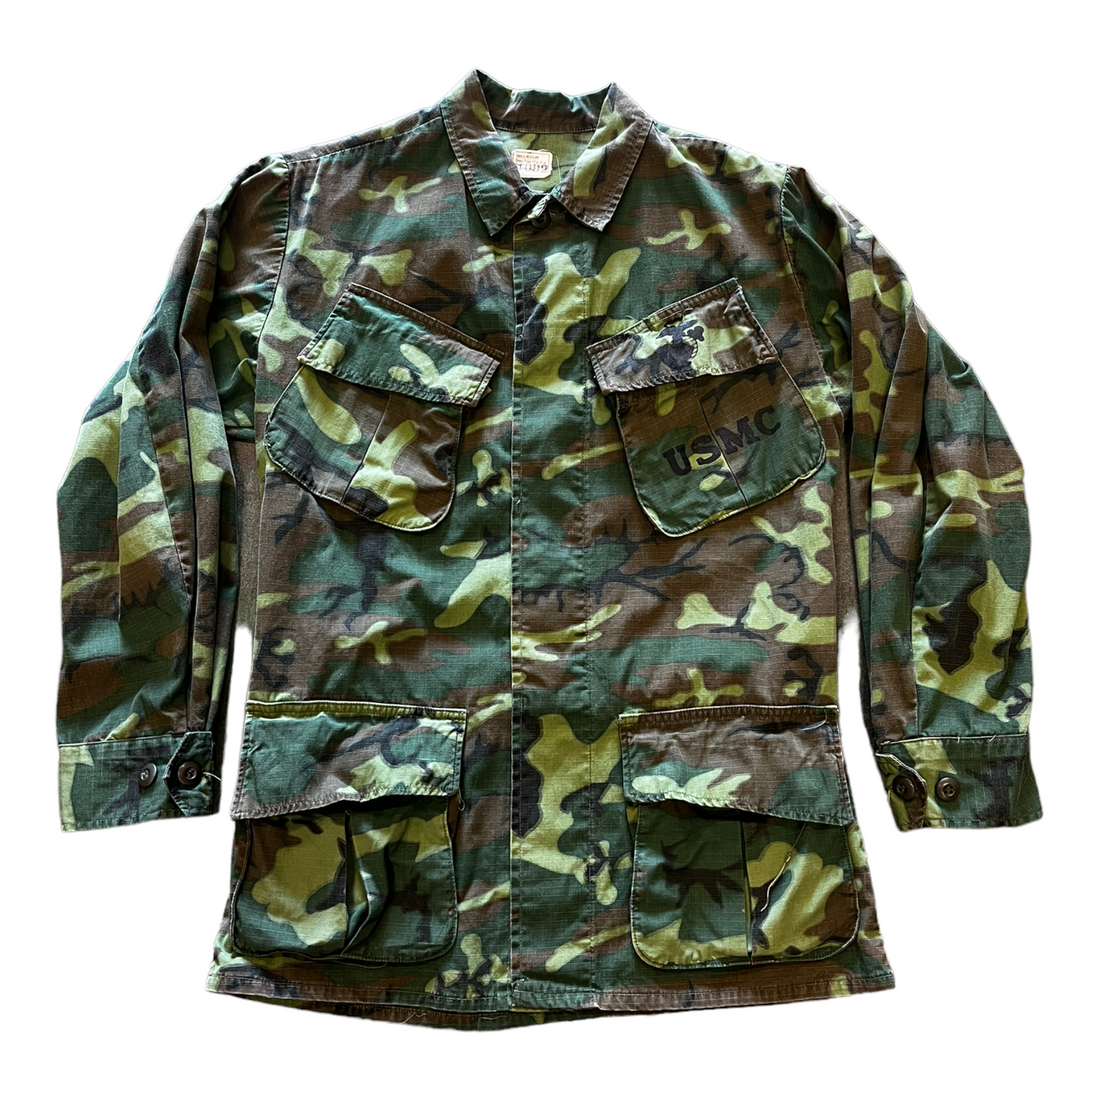 1969 DATED DEADSTOCK ERDL RIPSTOP JUNGLE SHIRT CAMO ‘SMALL’ - 1960S